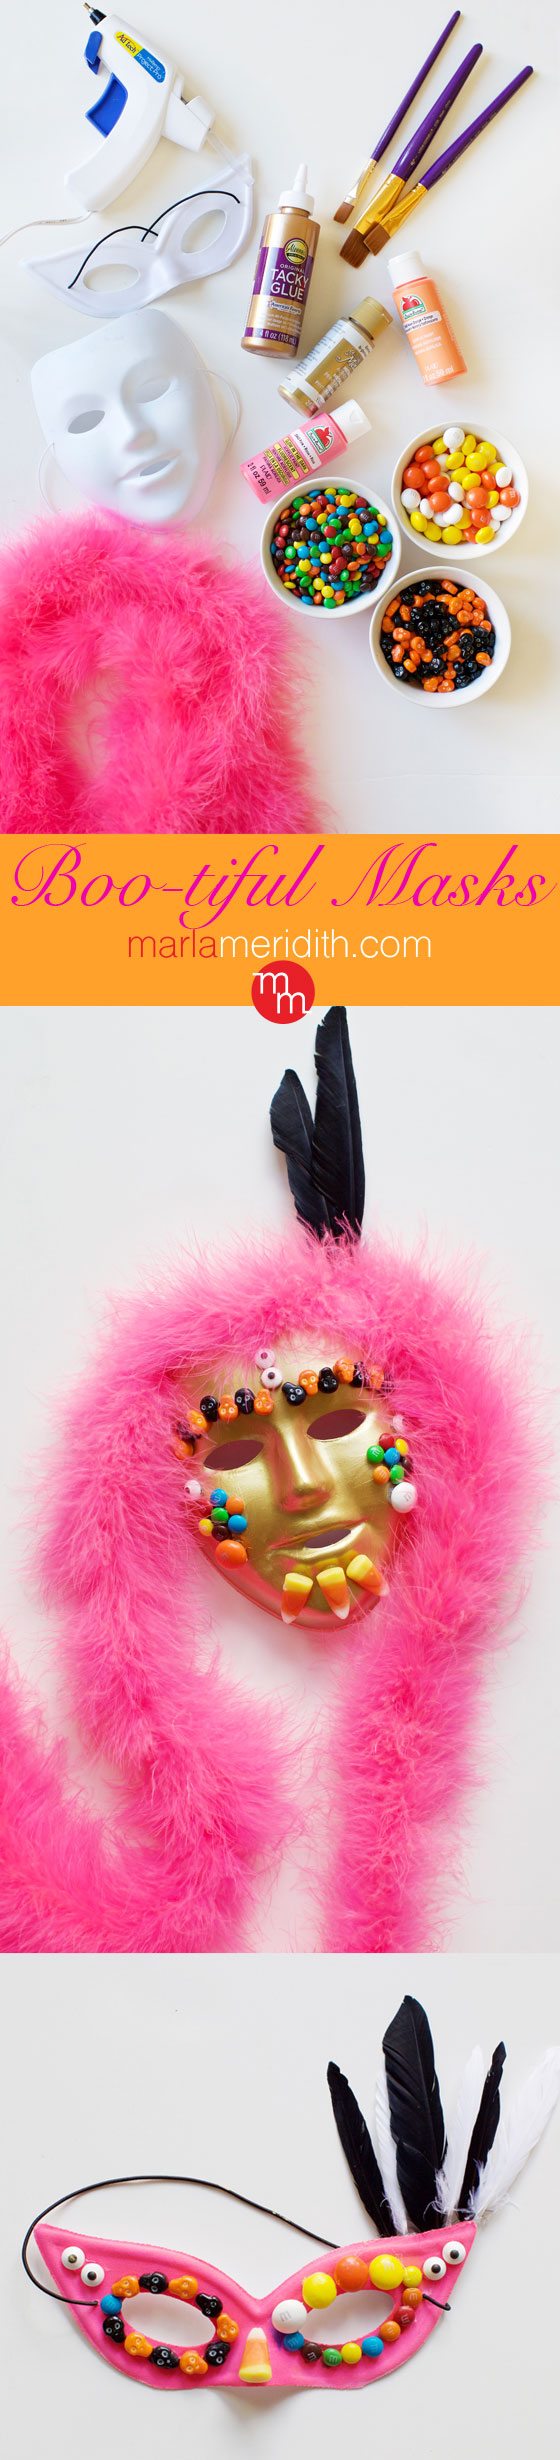 The BEST Halloween Recipes & Crafts! Make a HUGE hit at your holiday parties! MarlaMeridith.com ( @marlameridith )